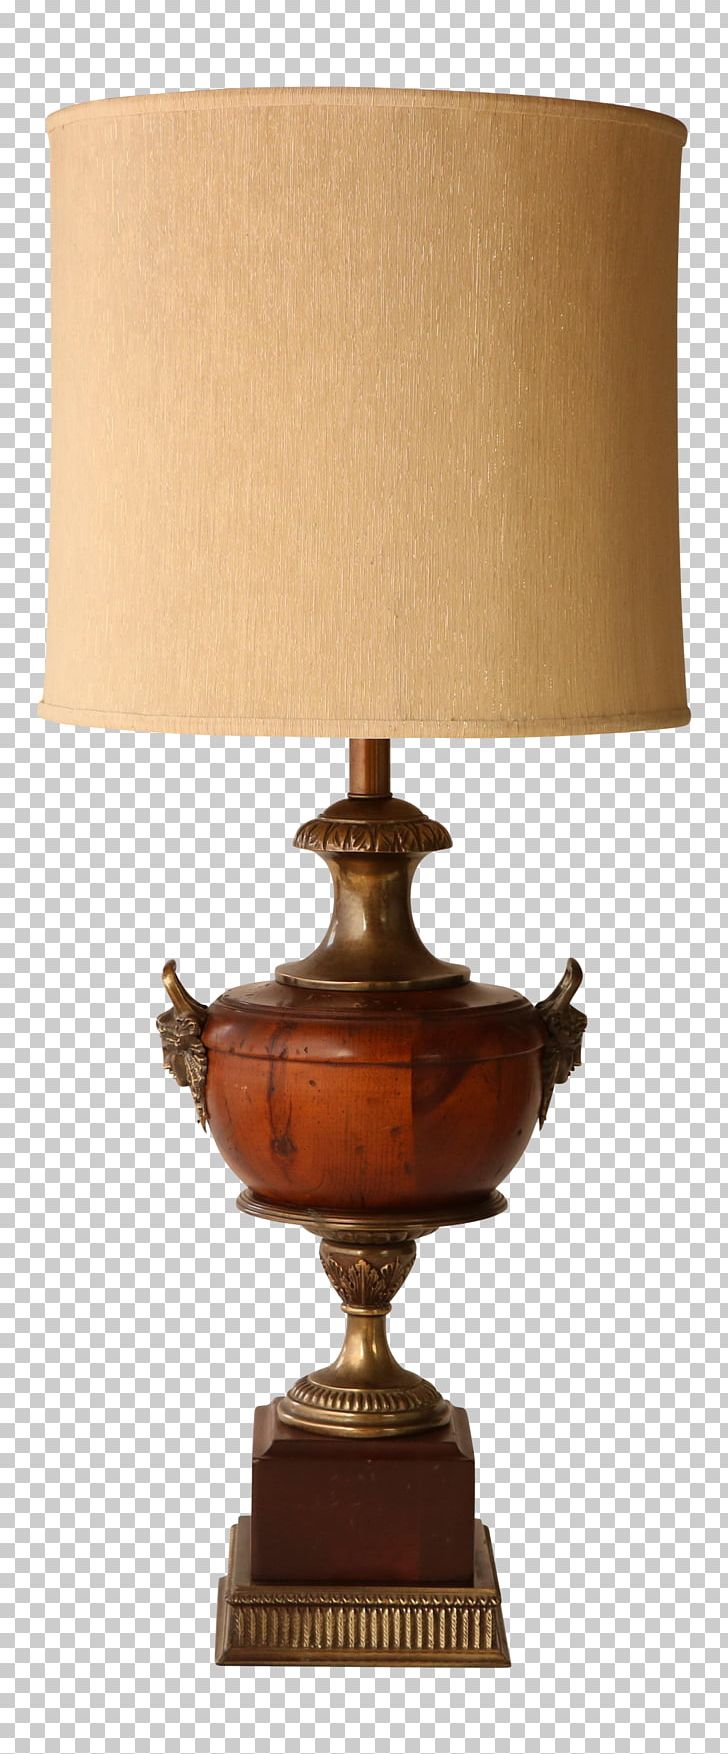 Lamp Shades Table Light Electricity PNG, Clipart, Candlestick, Ceiling Fixture, Chandelier, Cooper, Desk Free PNG Download